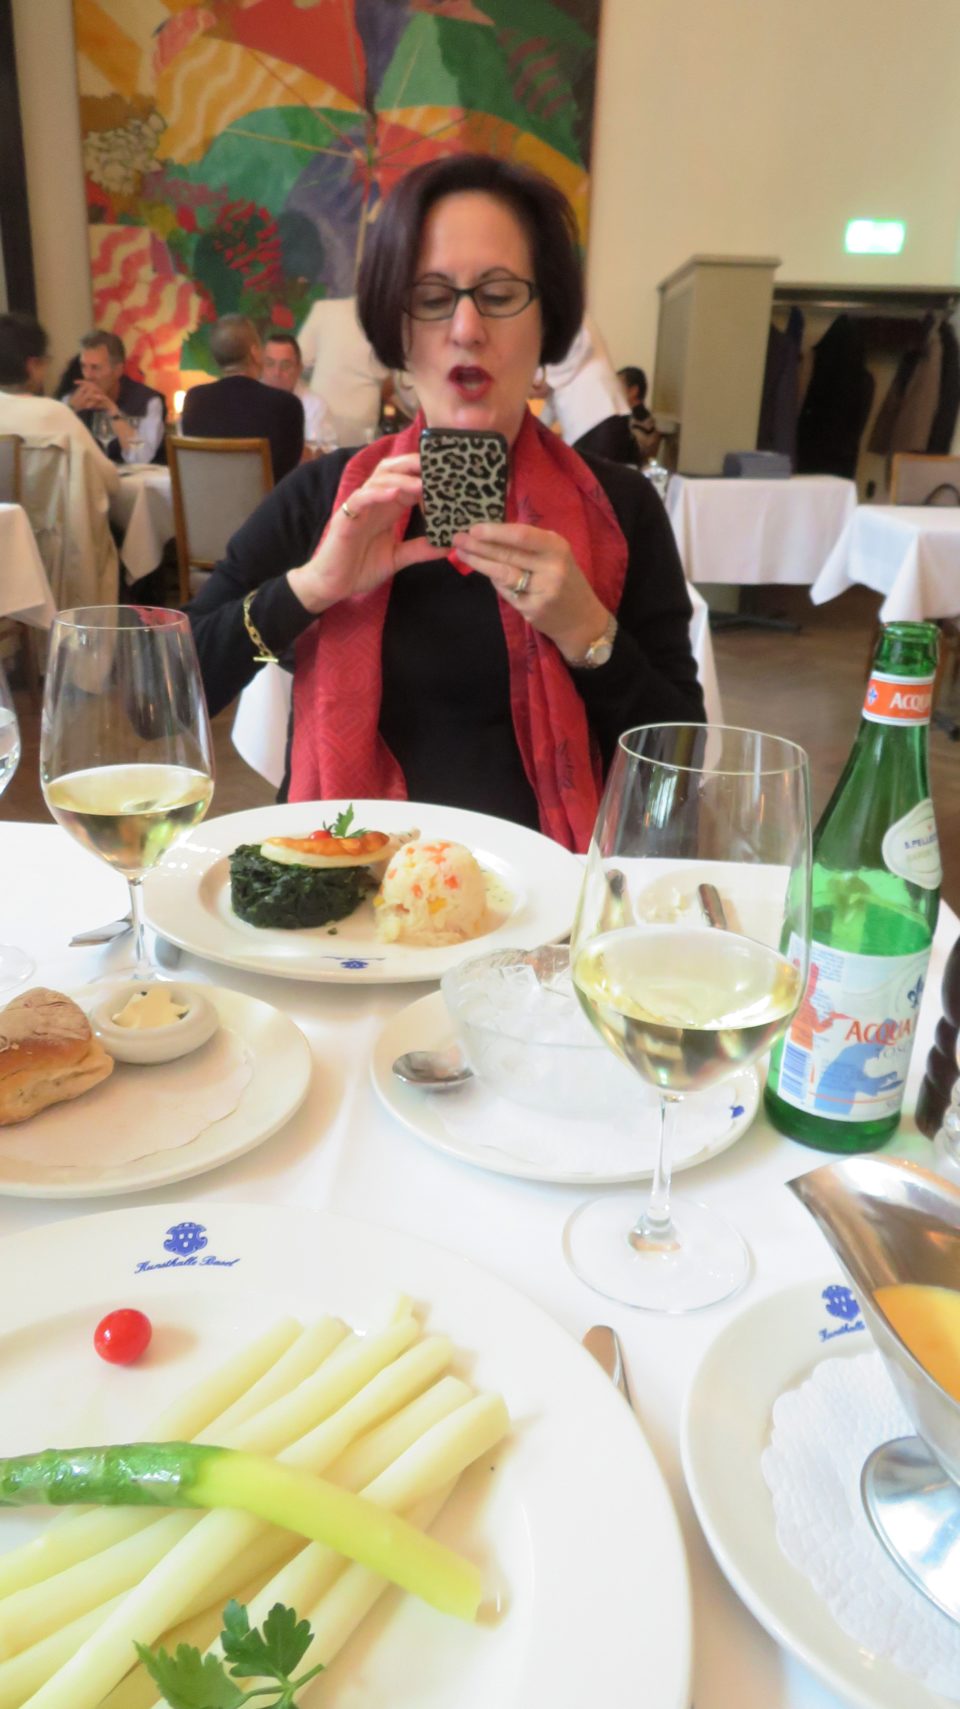 Lynn having a great time at the KunstHalle Restaurant in Basel, Switzerland